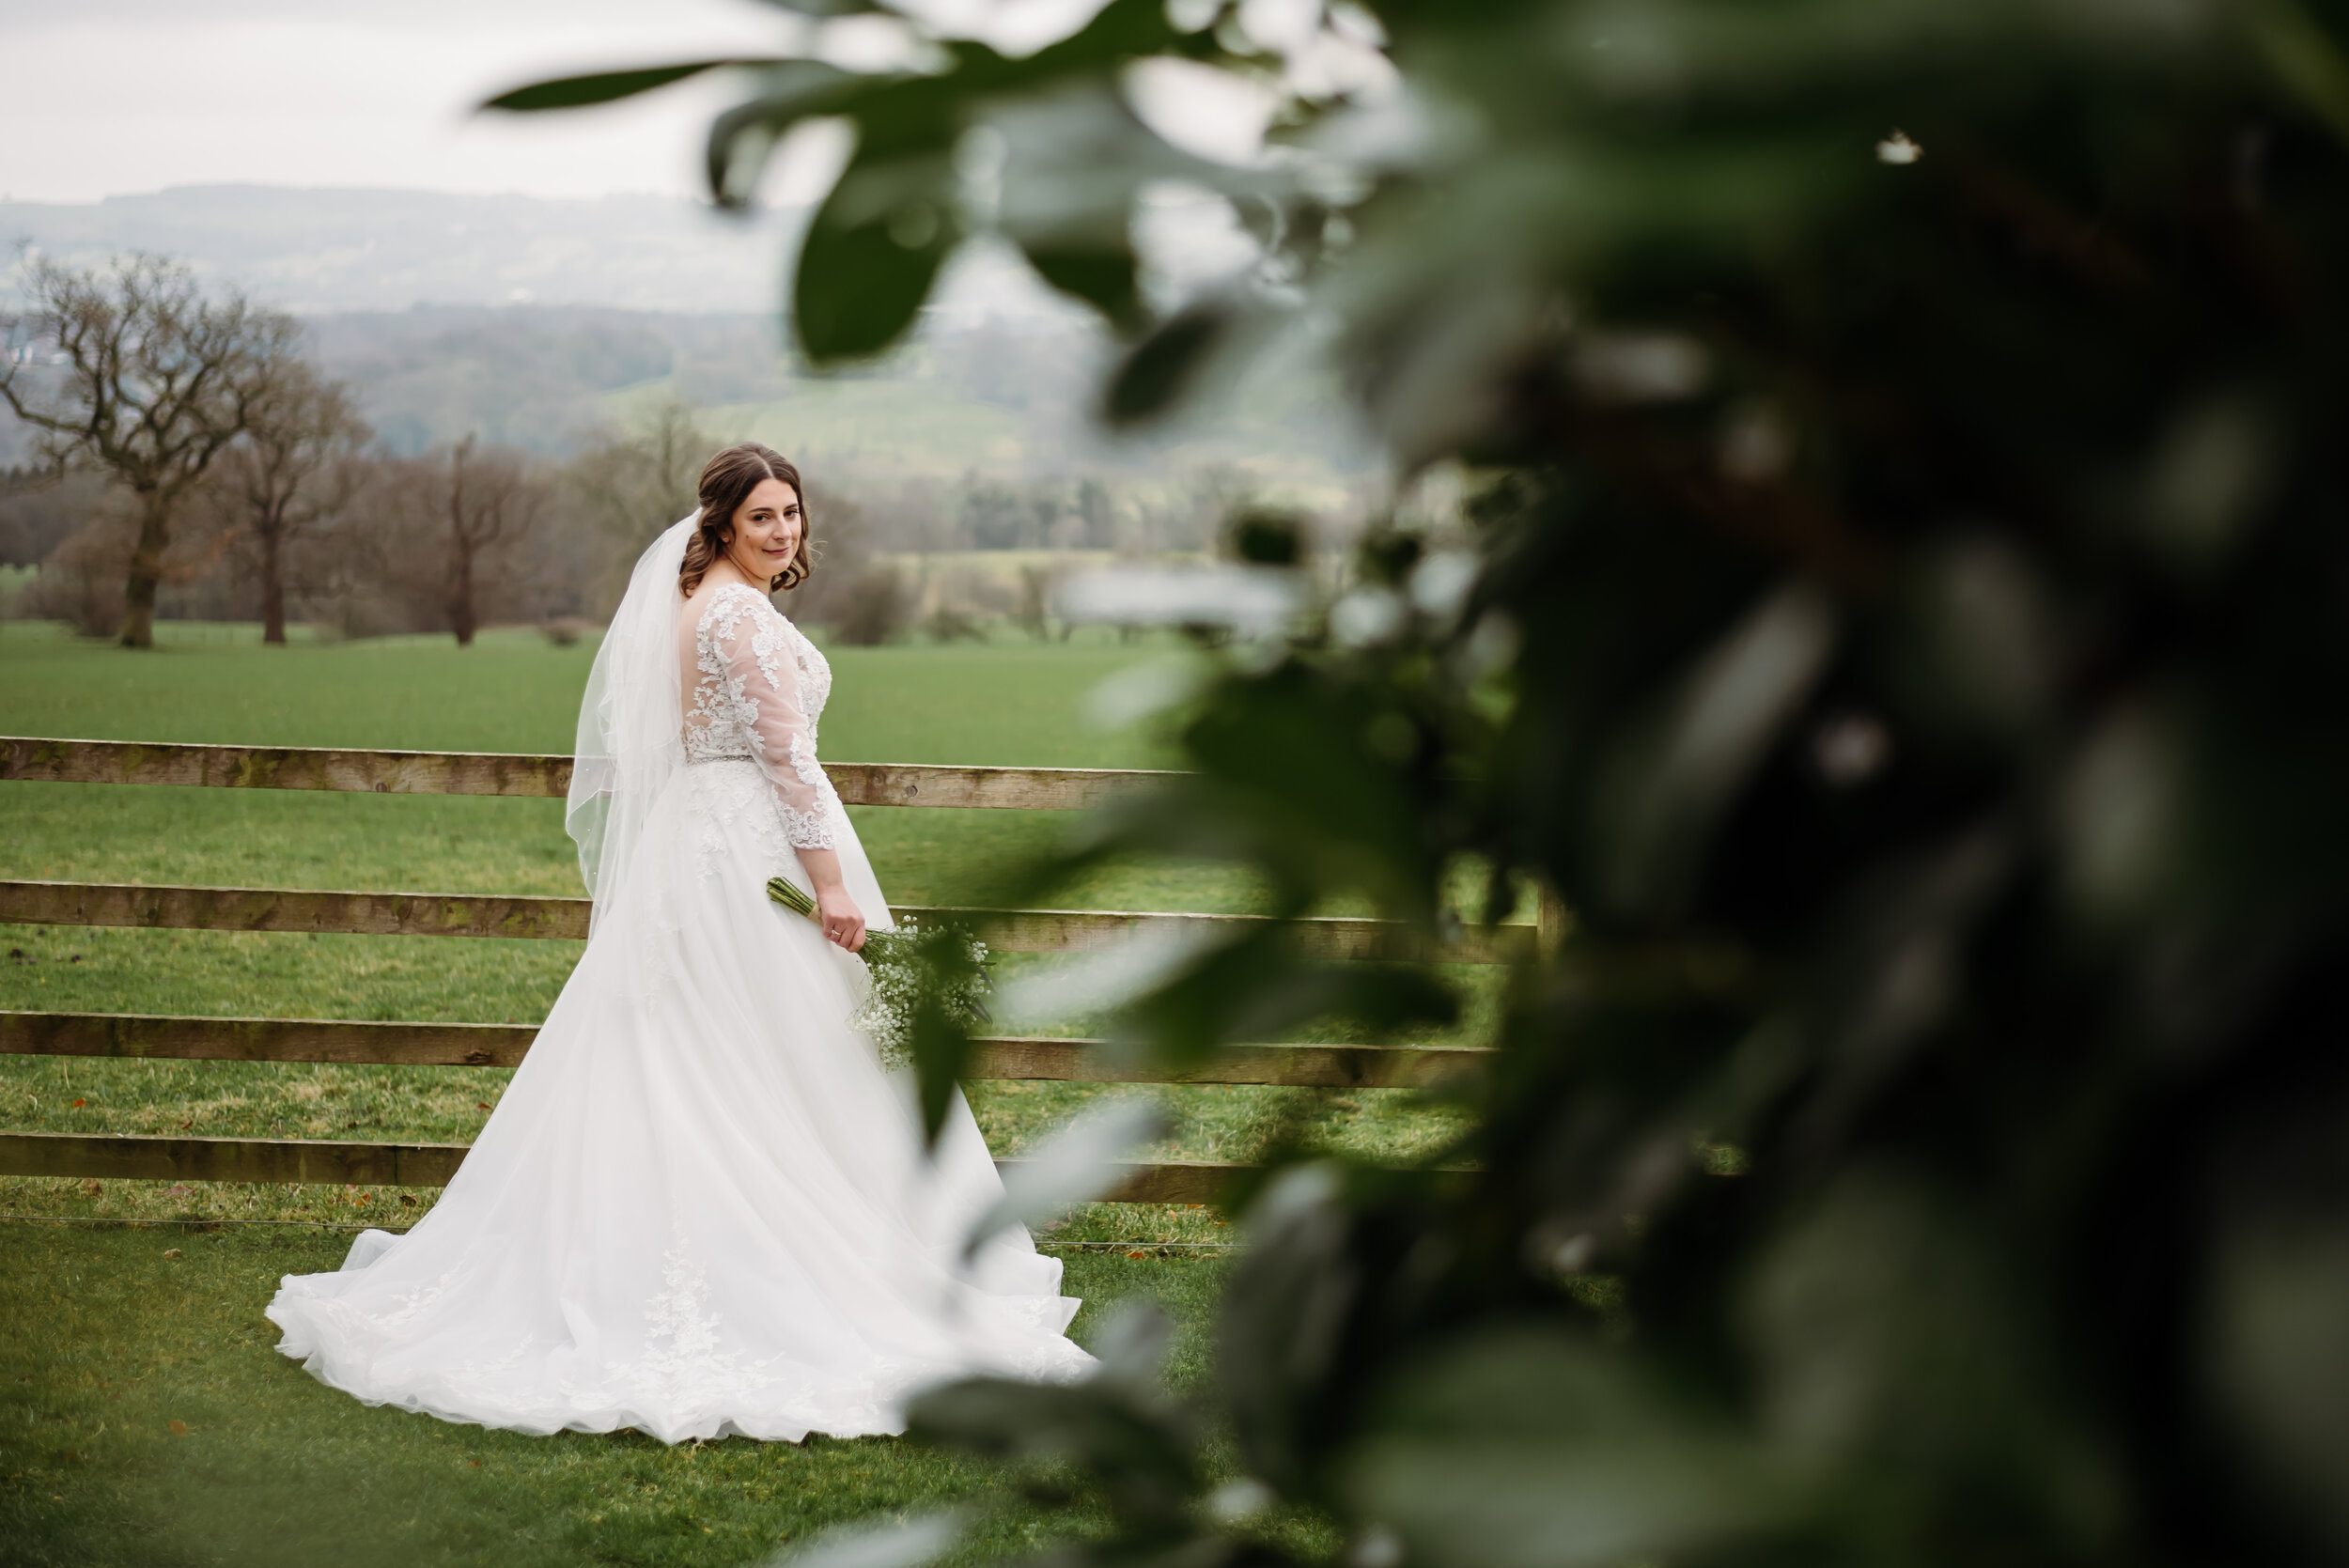 Bride portraits in the garden at The Shireburn Arms